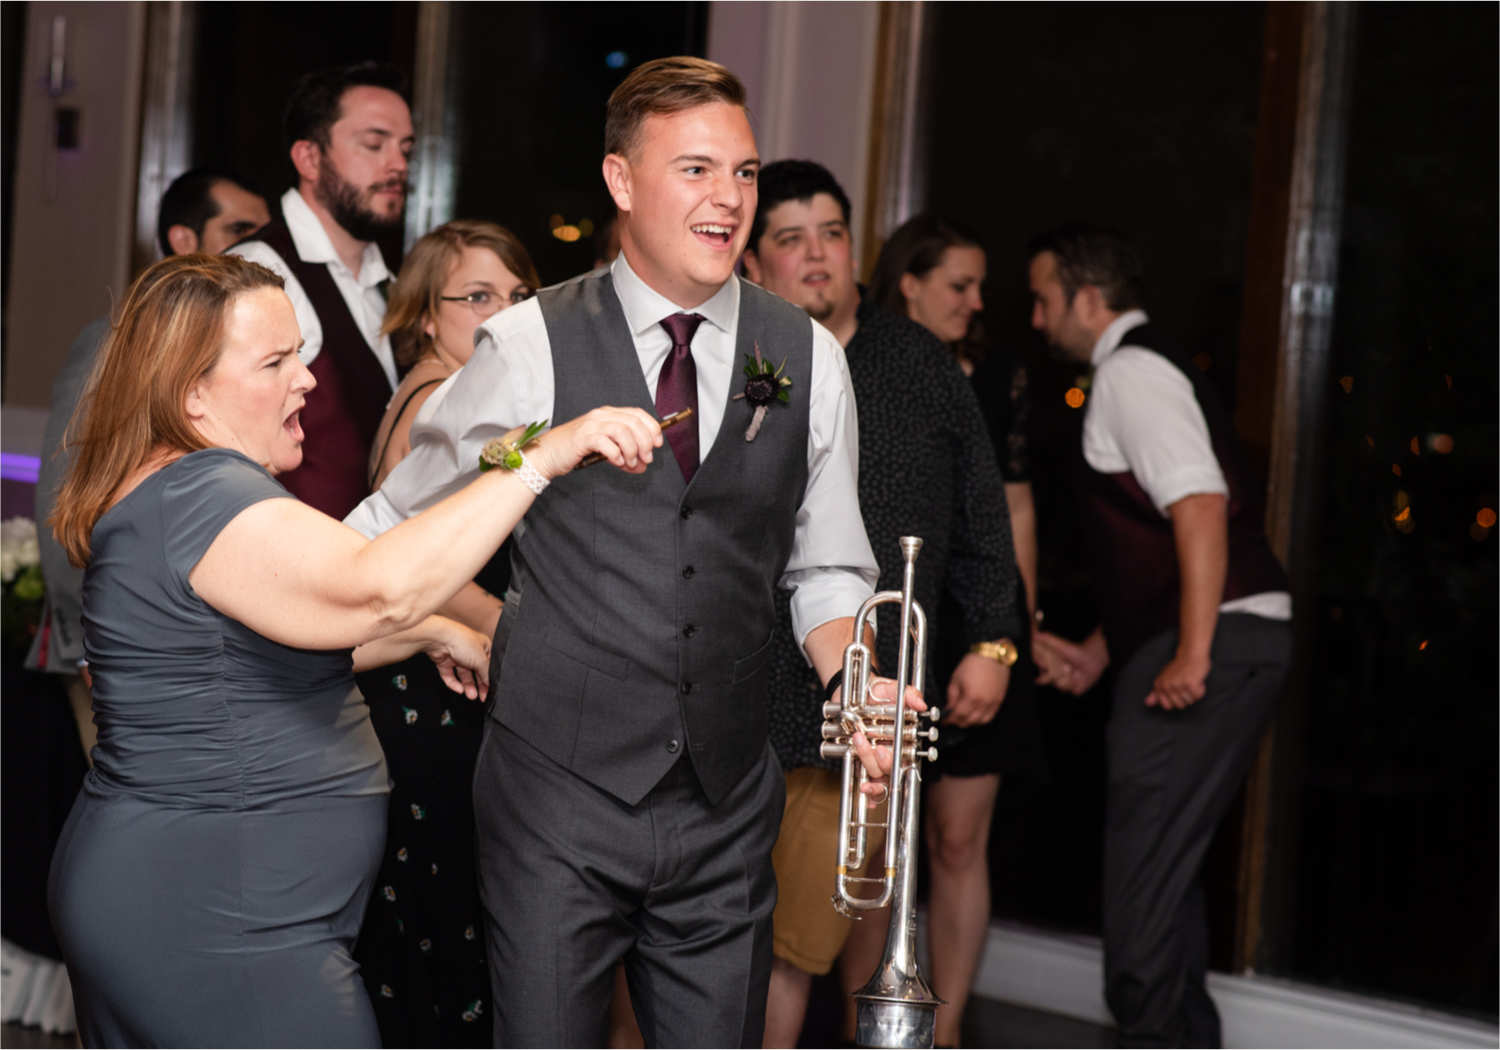 Modern Romantic wedding at Wedgwood Weddings Brittany Hill in Denver Colorado | Britni Girard Photography | Whiskey unity ceremony and live band The Burroughs are highlights of this musician couples wedding | Dragonfly Floral Company
